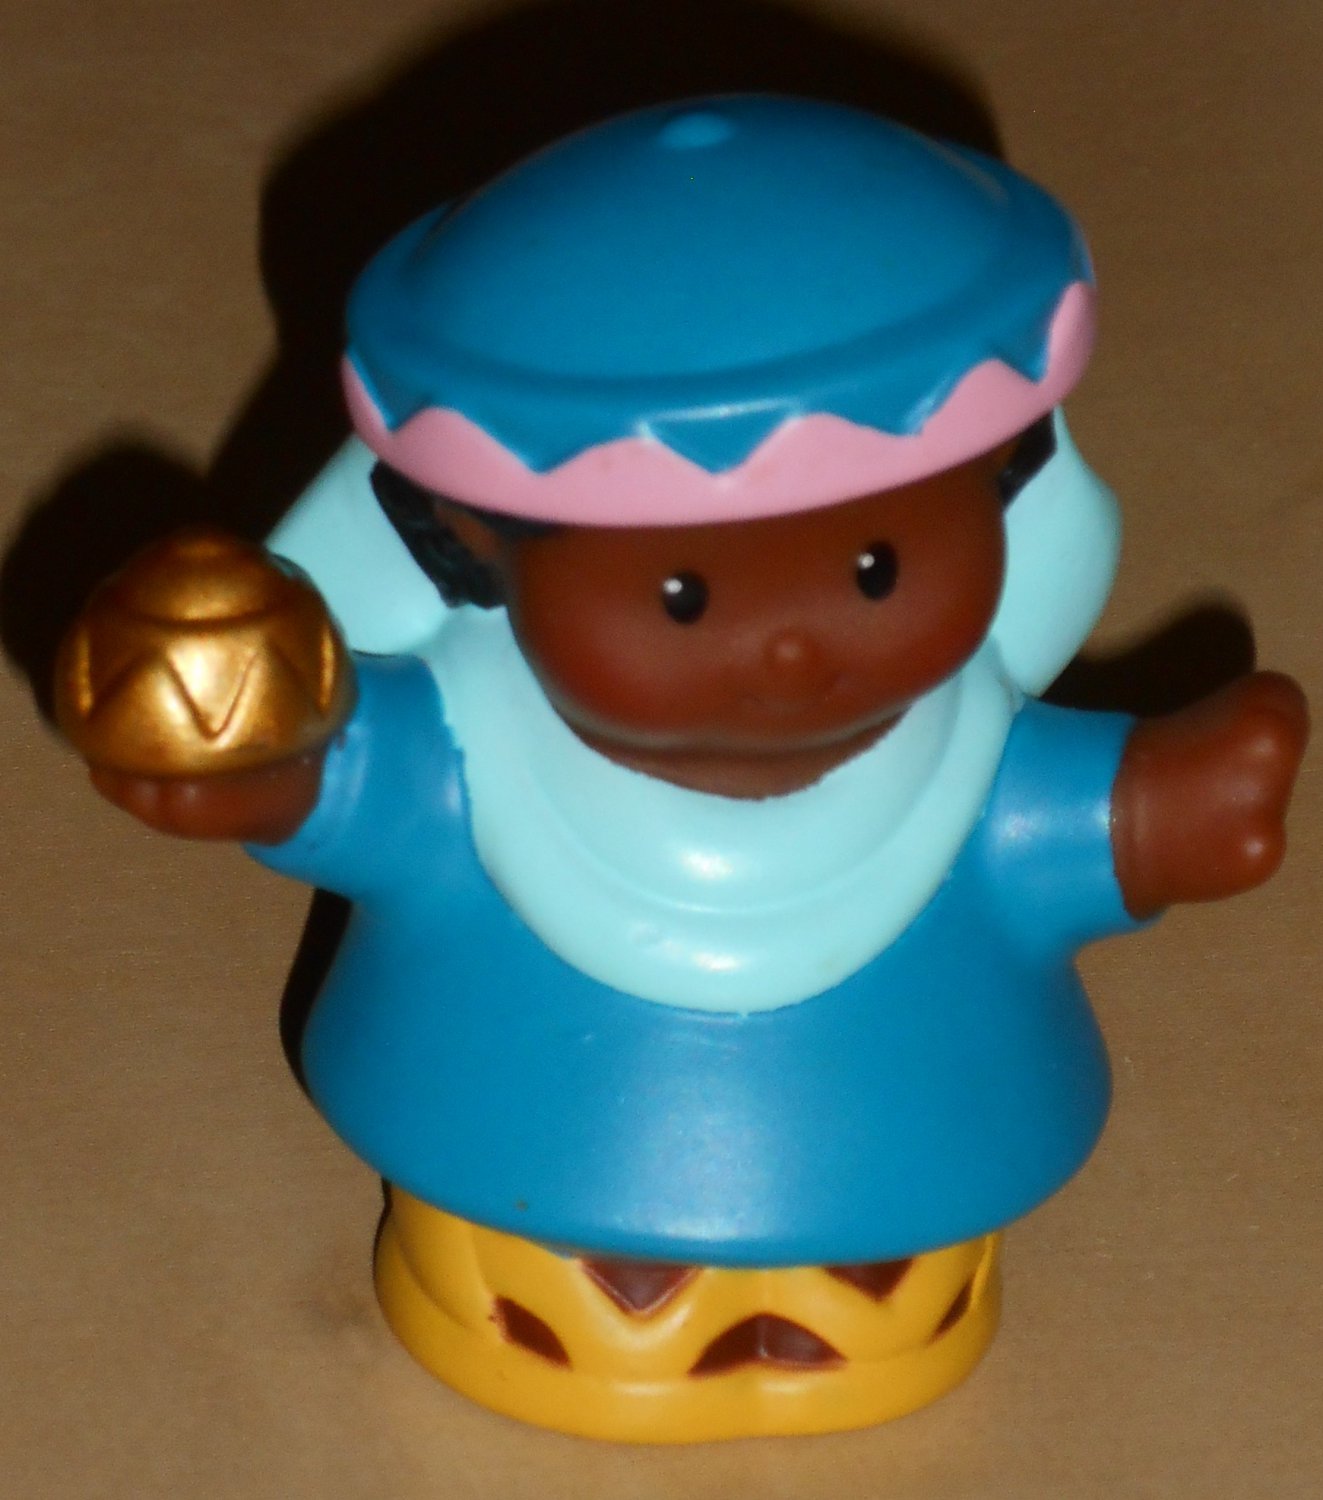 Replacement Dark Blue Teal Wise Man Wiseman Fisher Price Little People Christmas Nativity